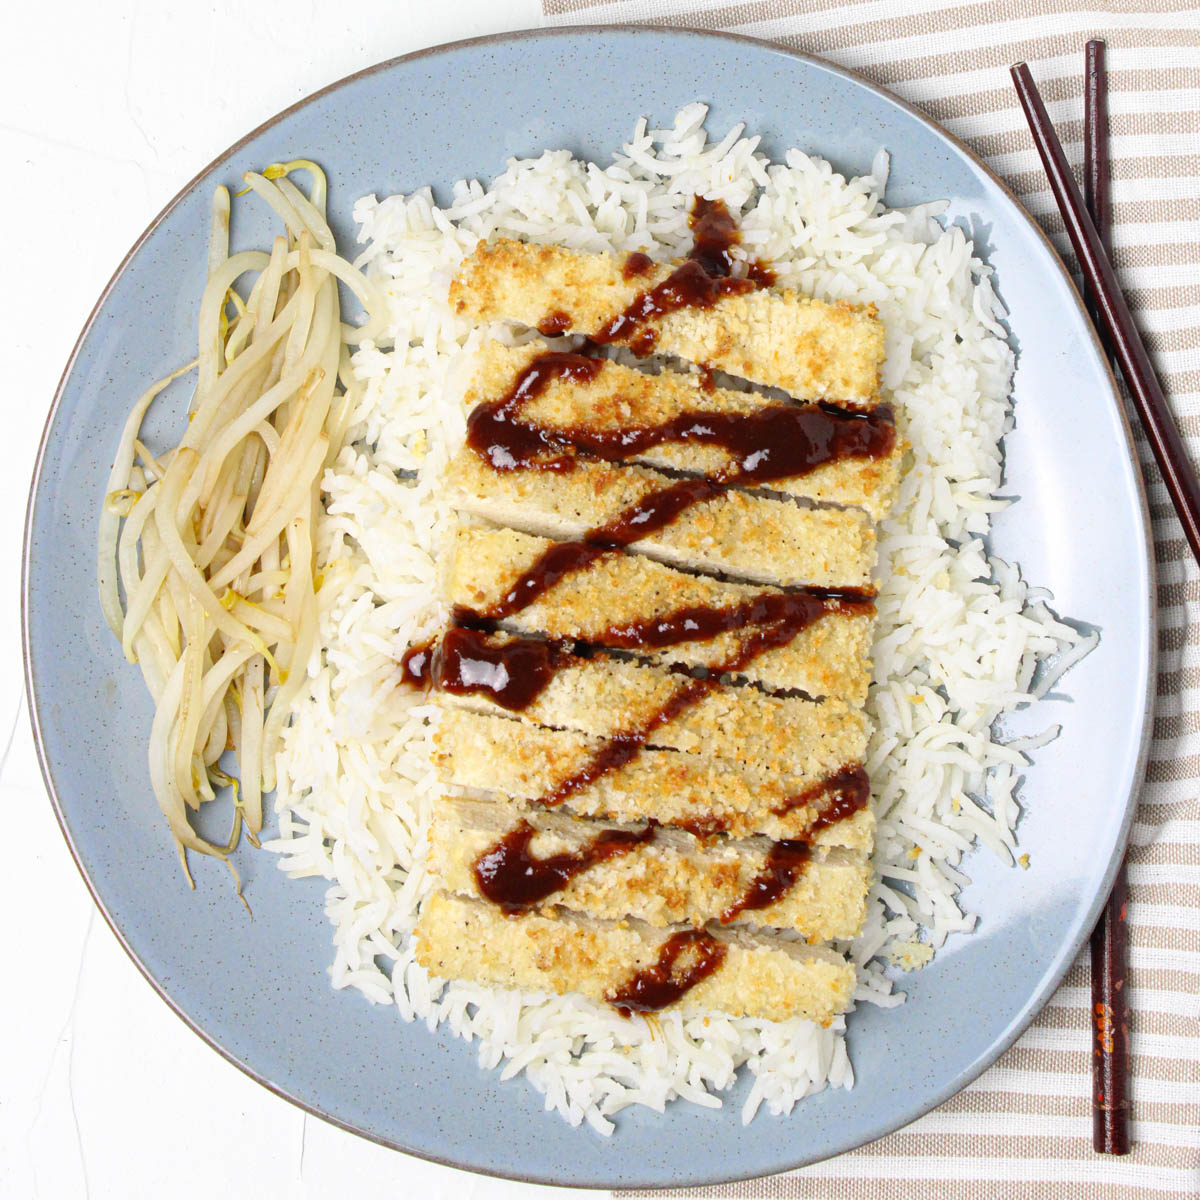 Blue plate with rice, bean sprouts, and tofu katsu with drizzled sauce.